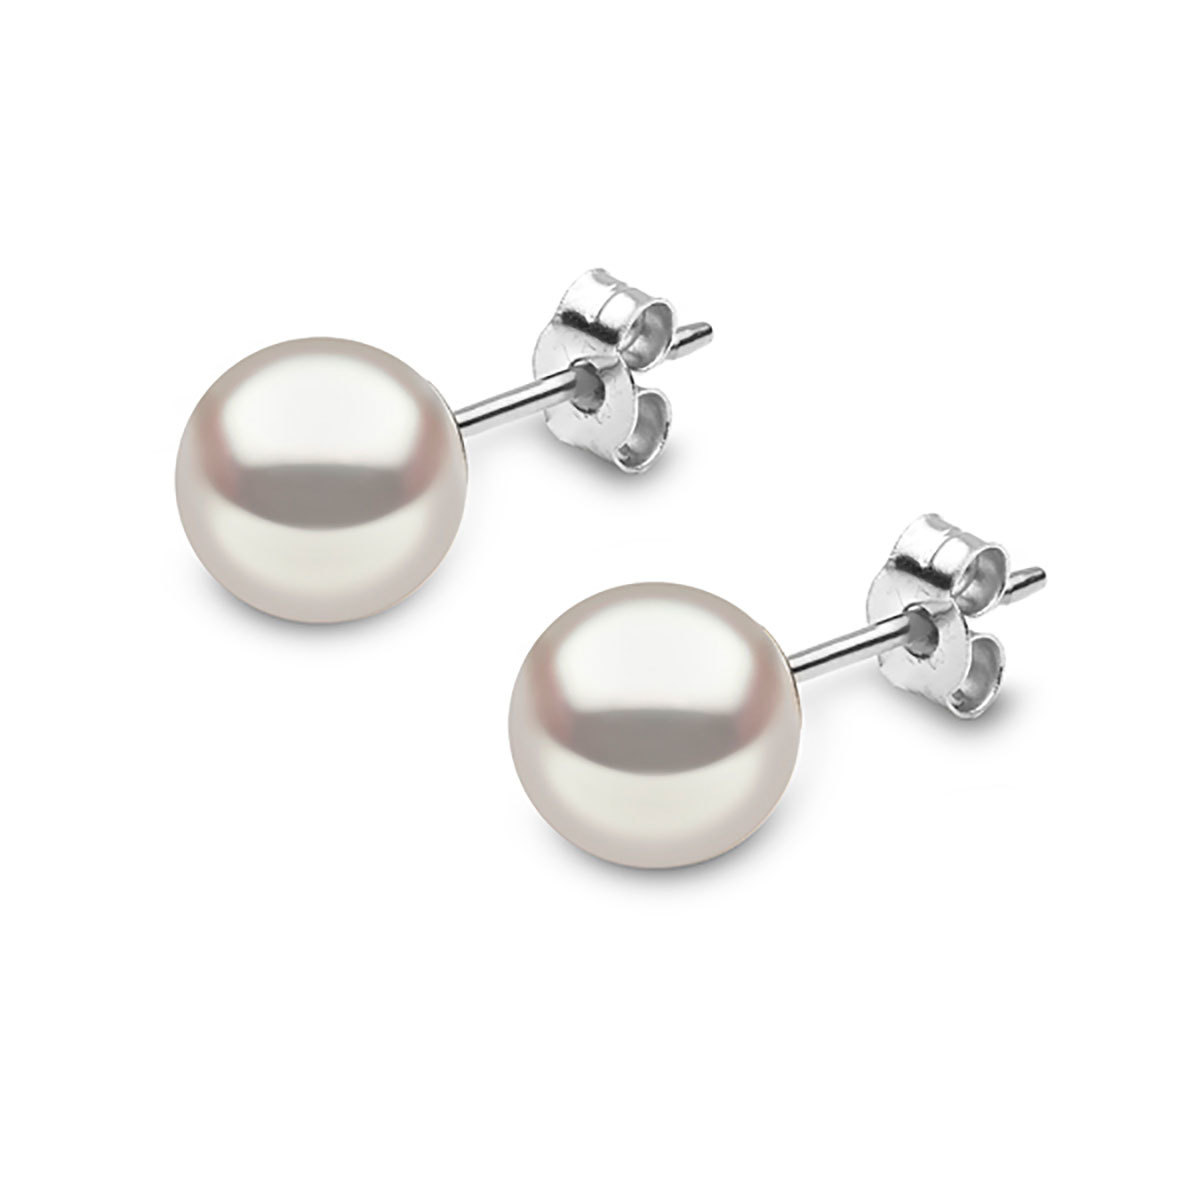 6.5-7mm Cultured Freshwater White Pearl Stud Earrings, 18ct White Gold